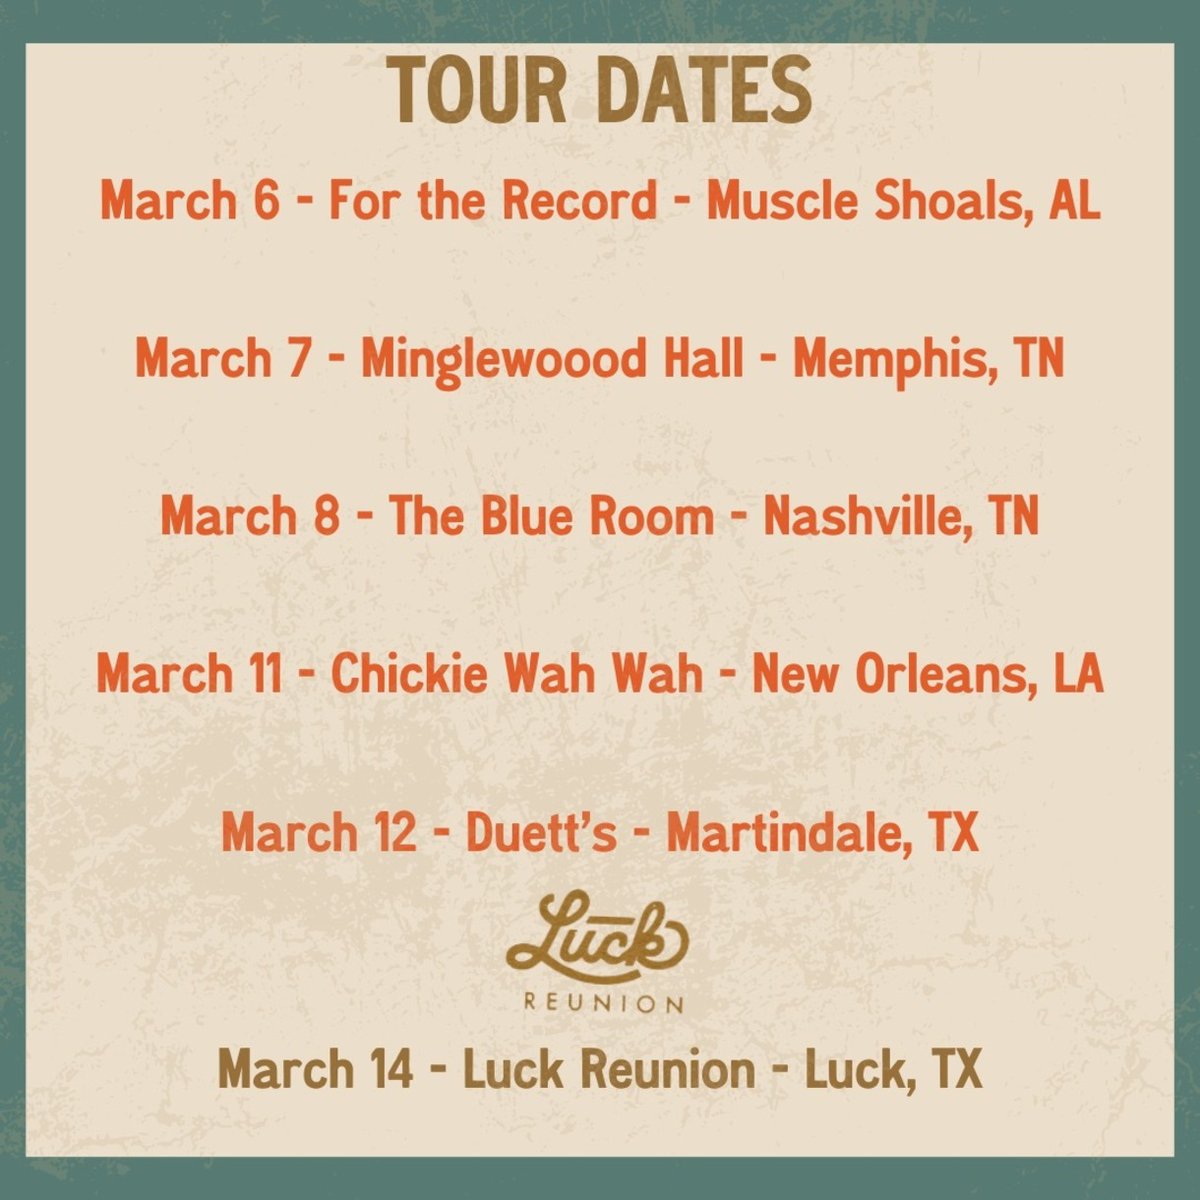 We're headed out on THE ROAD TO LUCK with @ohboyrecords !!! Oh Boy Records is sending their mouths way down South as they work their way to hang with Music's Most Famous Landlord! TN to TX: The Road to @LuckReunion starts on March 6th and is presented by Jack Daniel's. Join